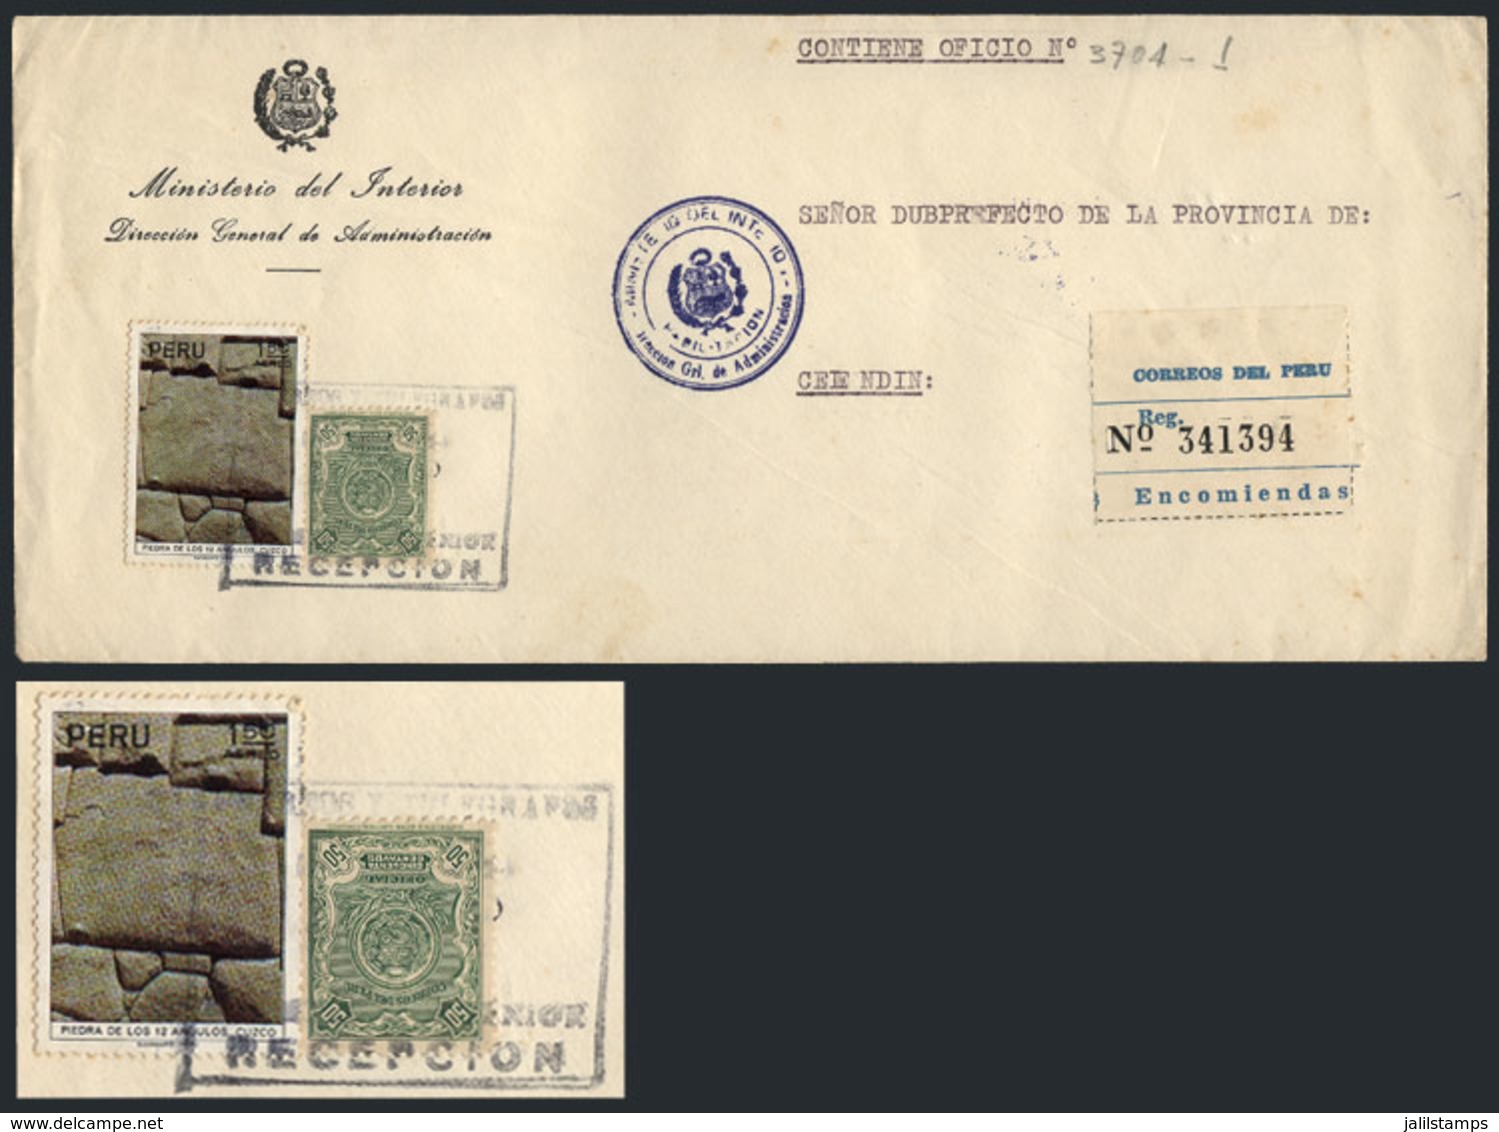 PERU: Official Cover Of The Ministry Of The Interior Sent From Cajamarca To Celendin On 15/NO/1972 With Interesting Post - Peru